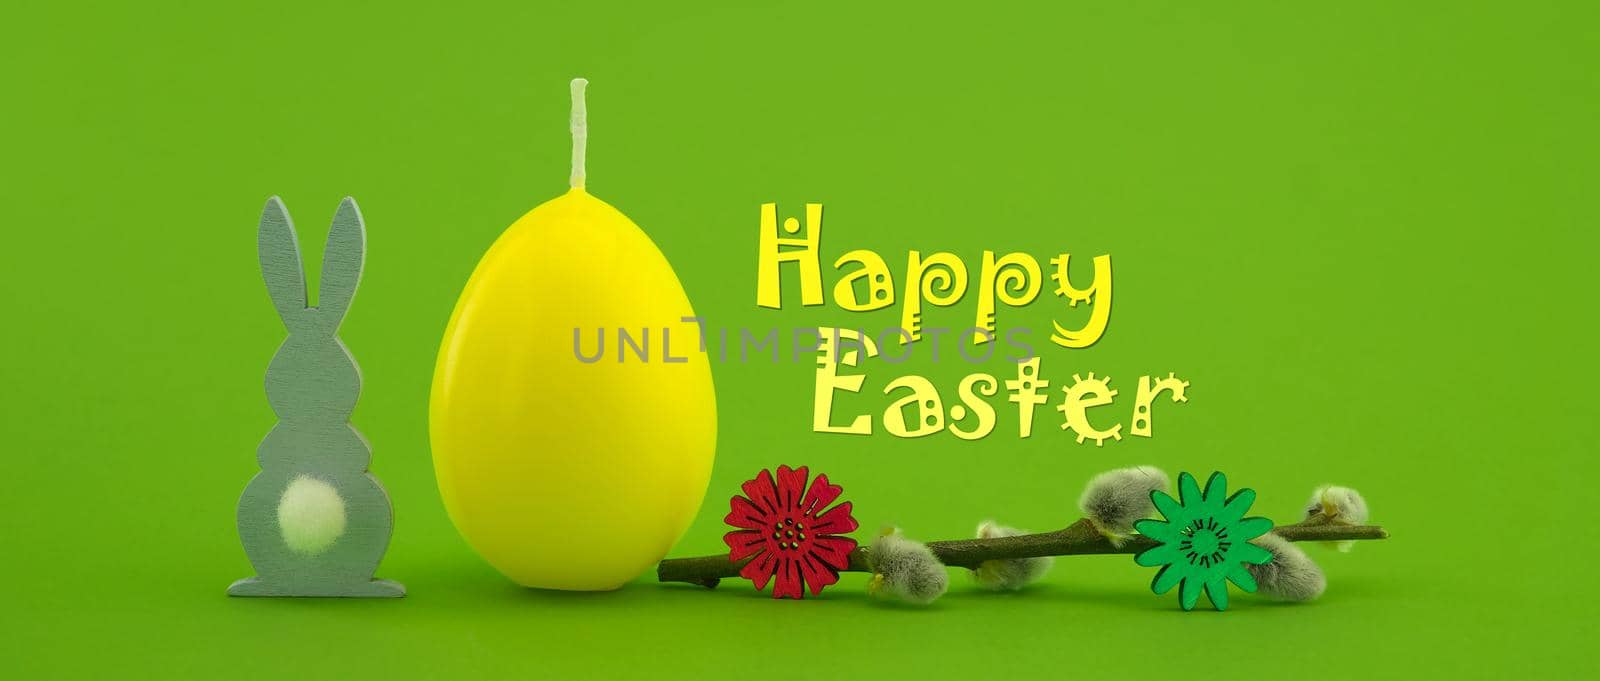 Easter holiday banner with yellow egg shaped candle, pussy willow branch and Easter Rabbit figure over a green background with text "Happy Easter"